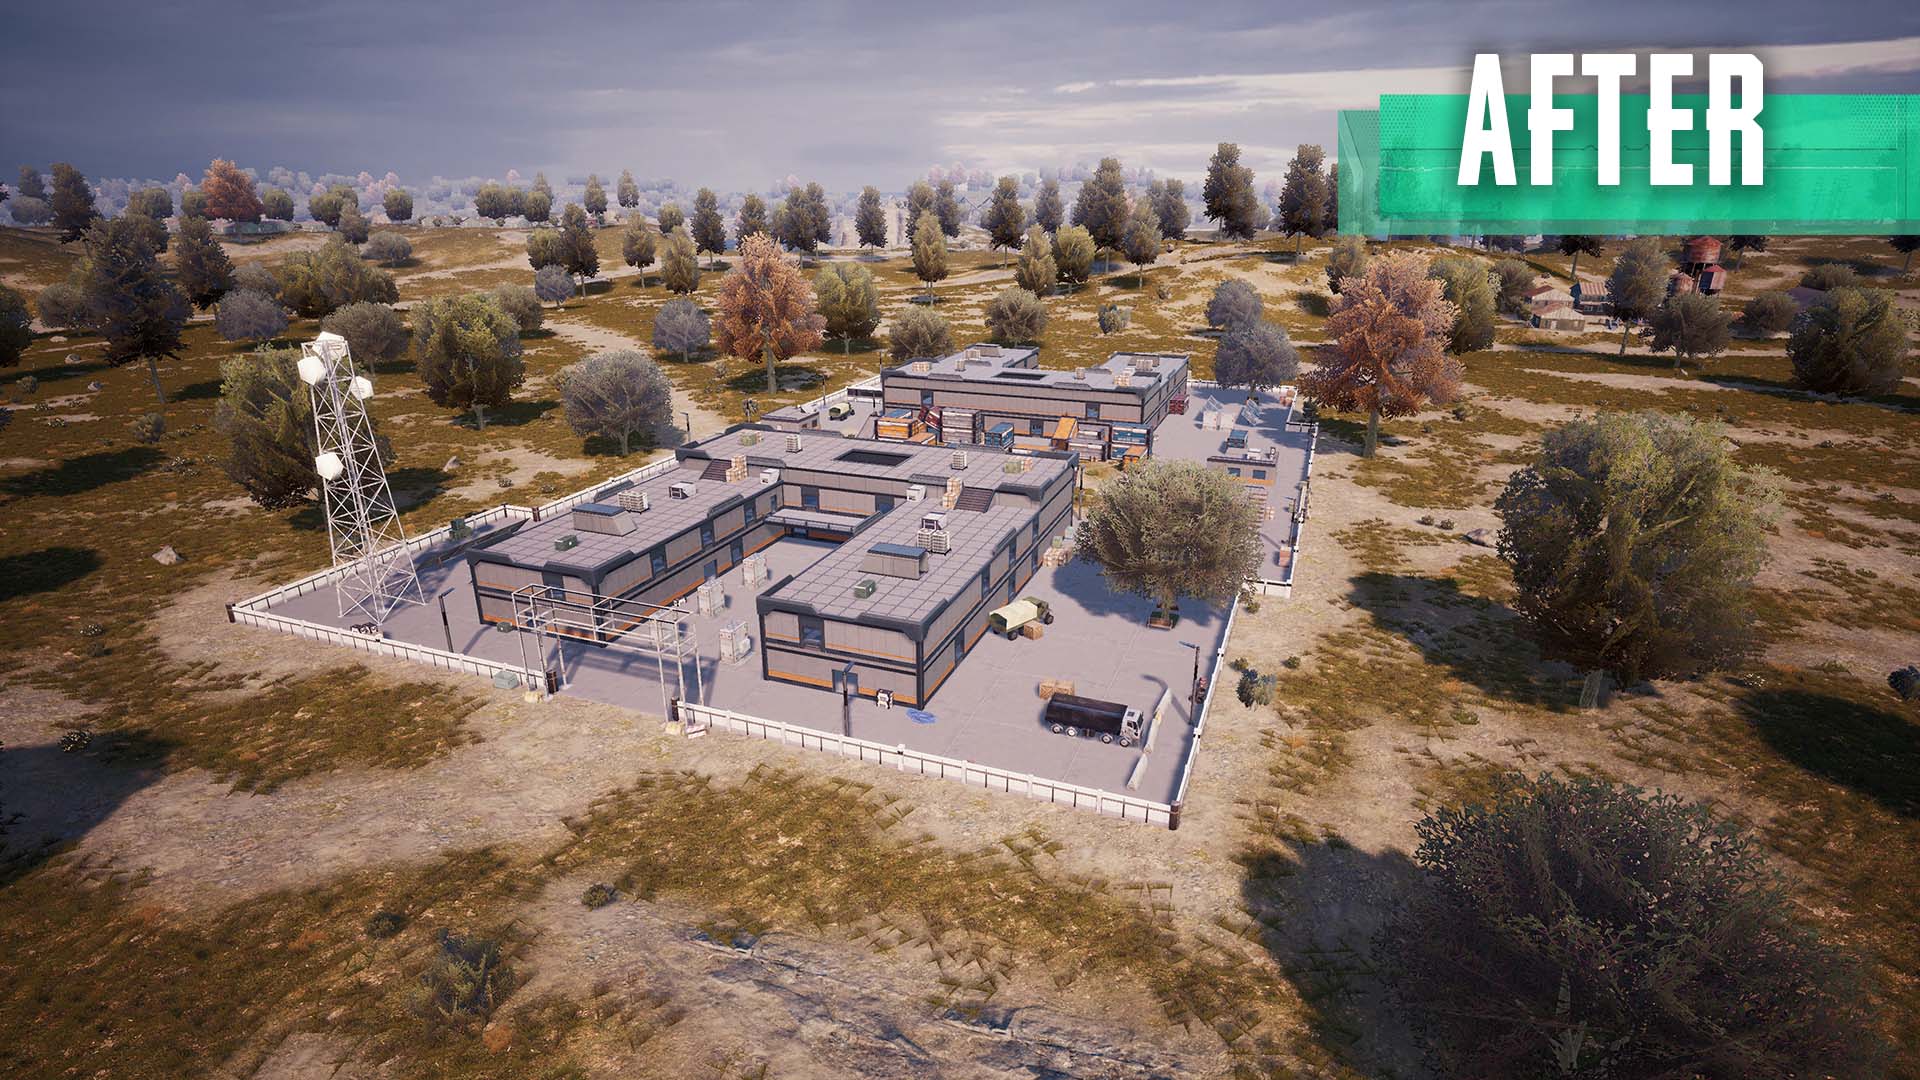 New State Mobile April Update brings The brand new Avanpost in Erangel, Check out the Vehicle Spawn Changes in PUBG New State